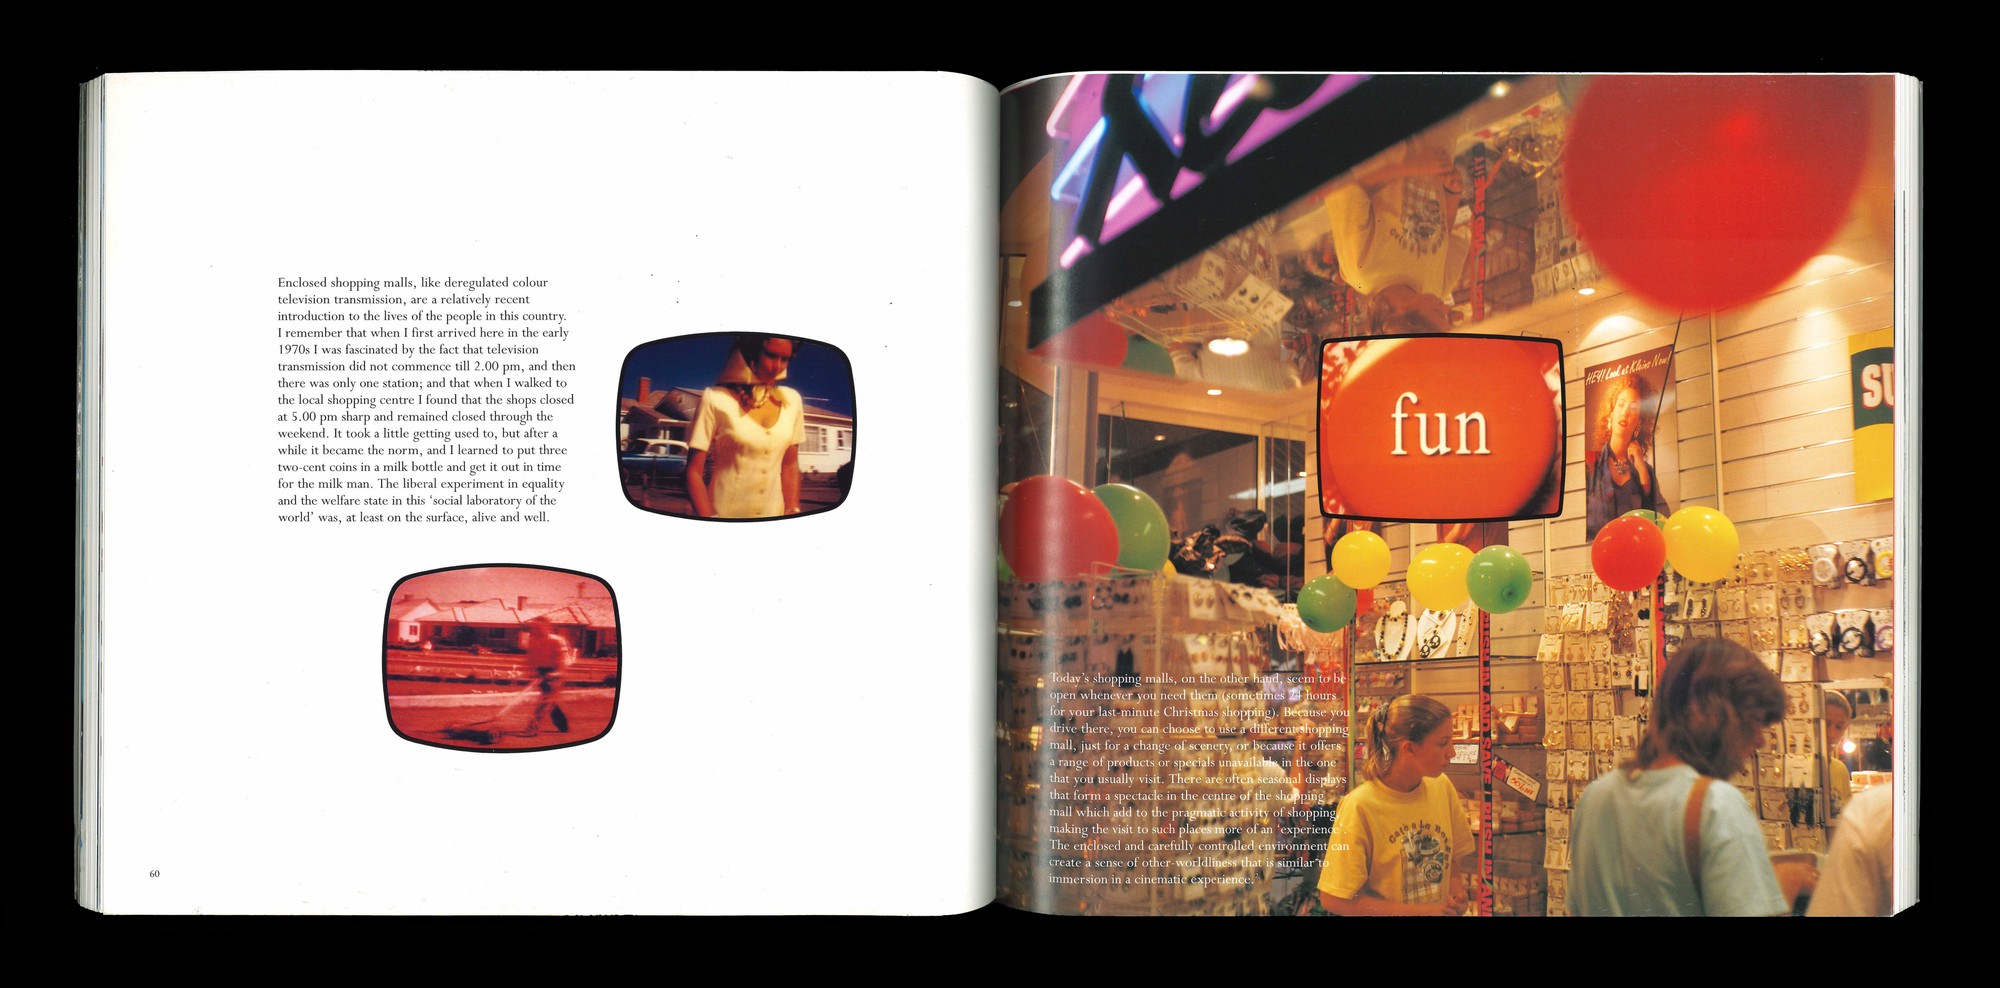 Colour photograph of shopping mall along sith small images of colour television, laid out with text across a double-page spread.